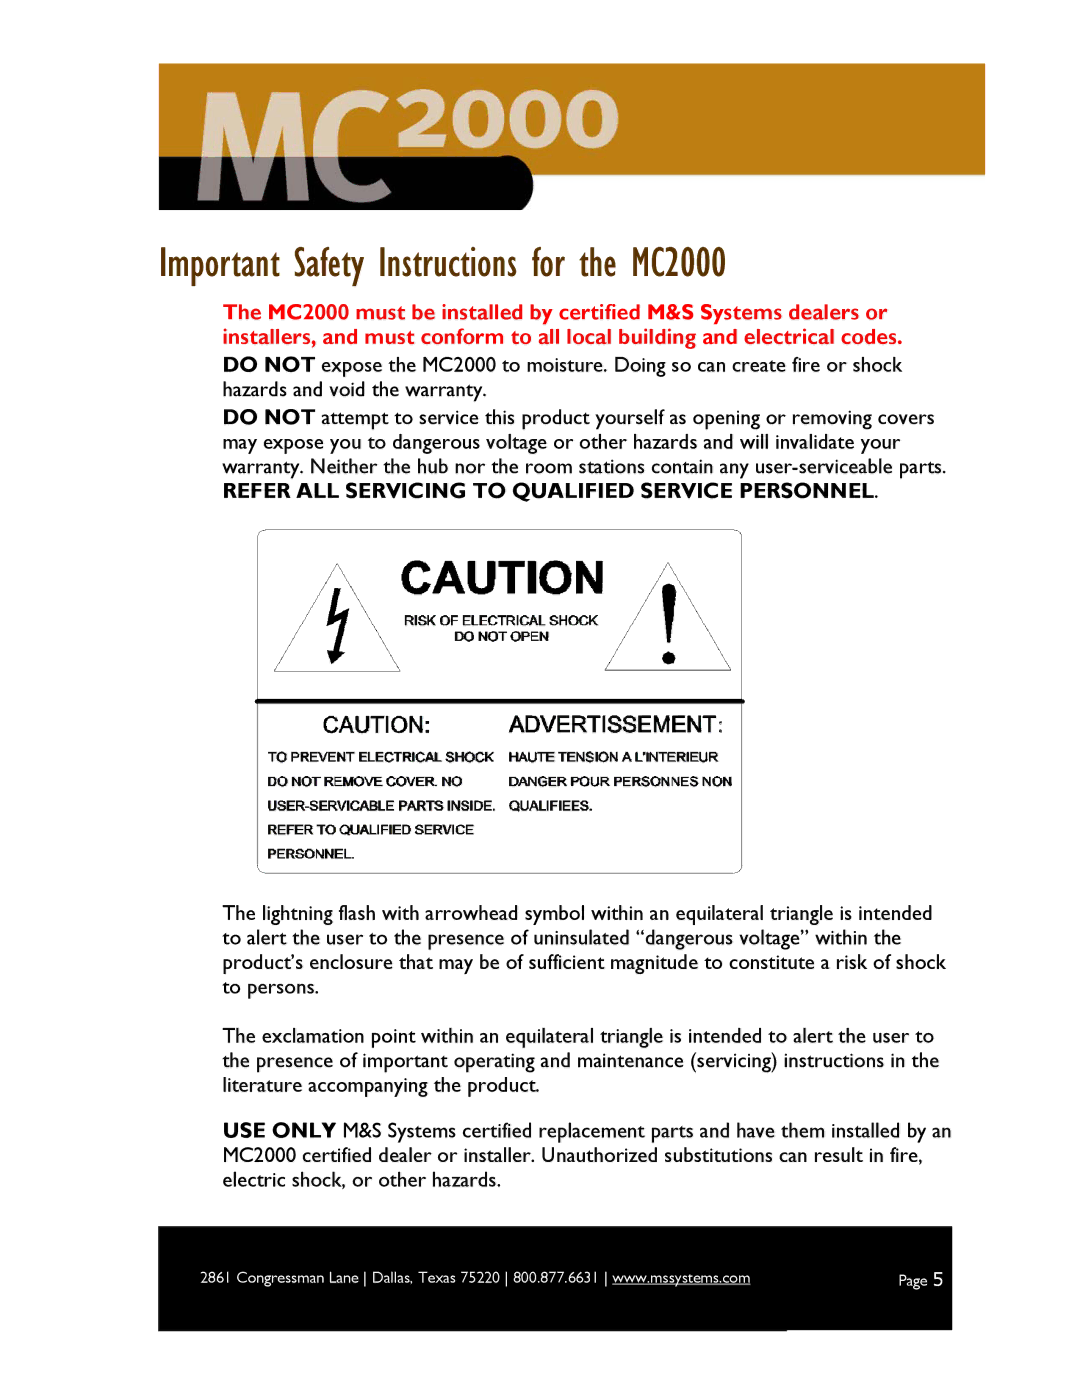 M&S Systems Important Safety Instructions for the MC2000, Refer ALL Servicing to Qualified Service Personnel 